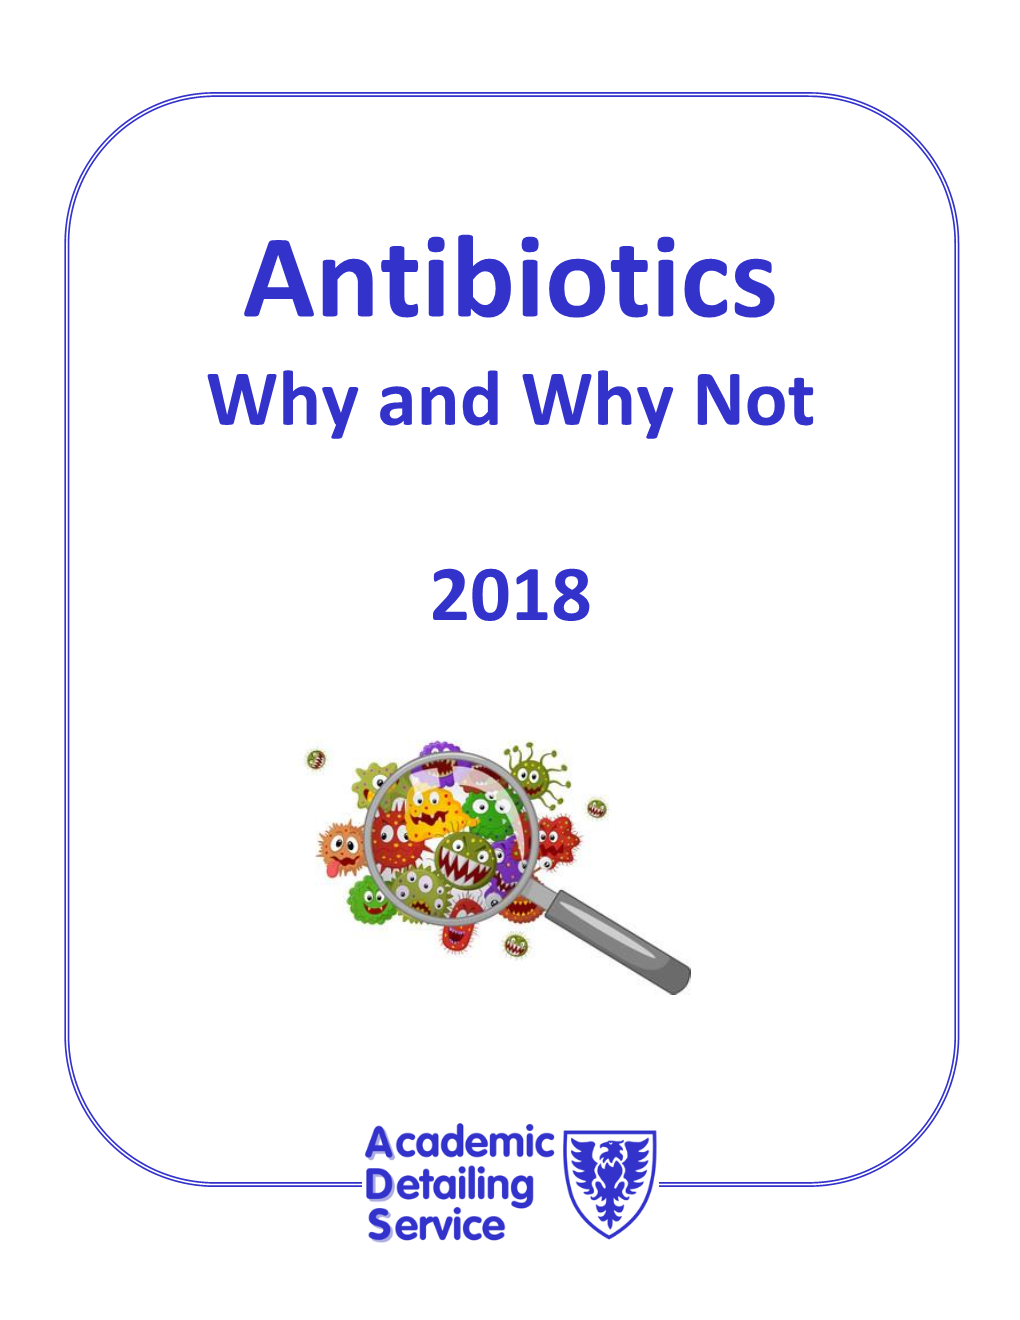 Update Antibiotics: Why and Why Not to 2018